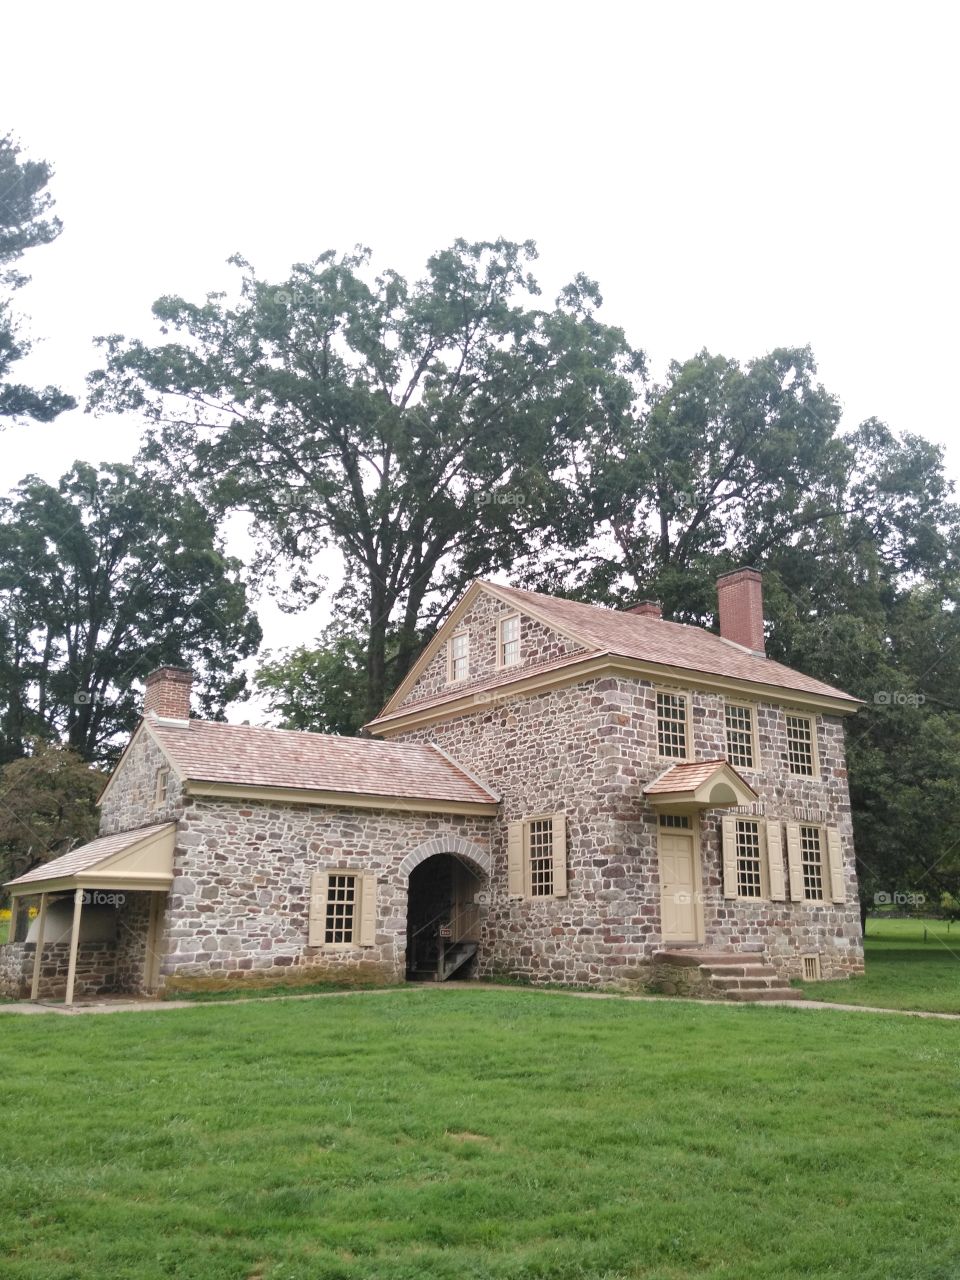 General Washington's Headquarters at Valley Forge